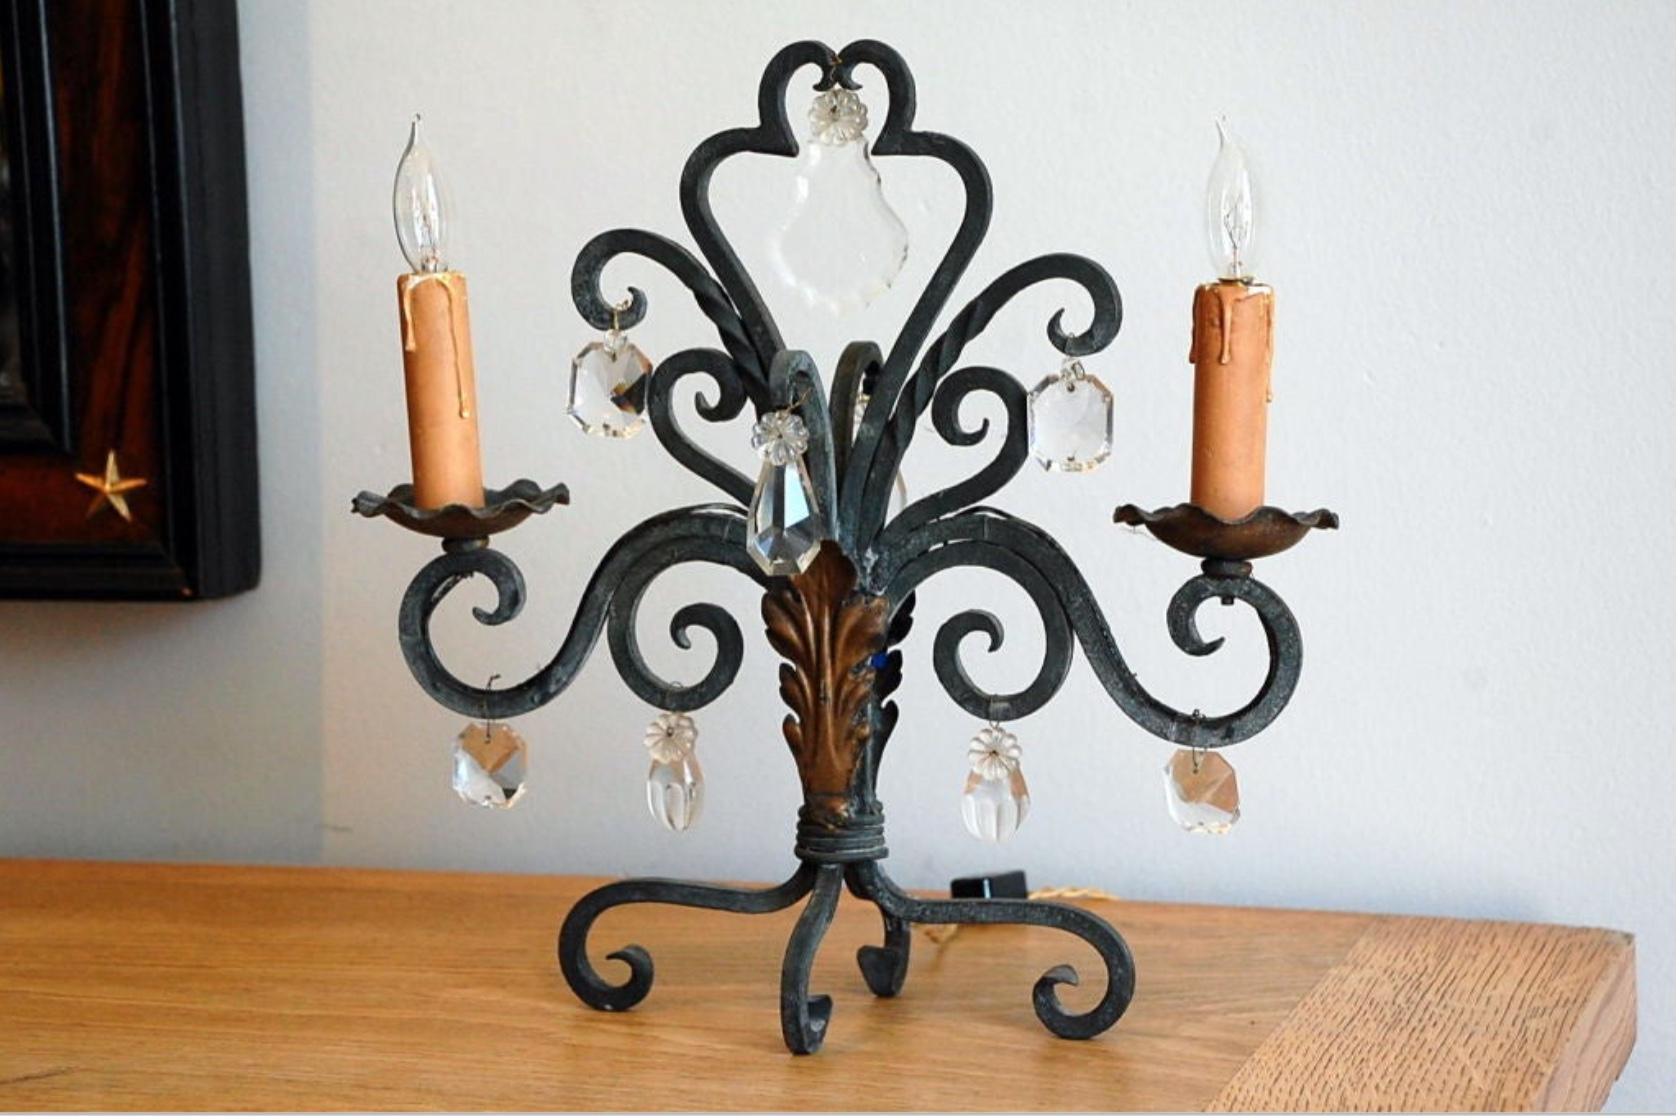 Pair of intricate French 1940s candelabra lights.